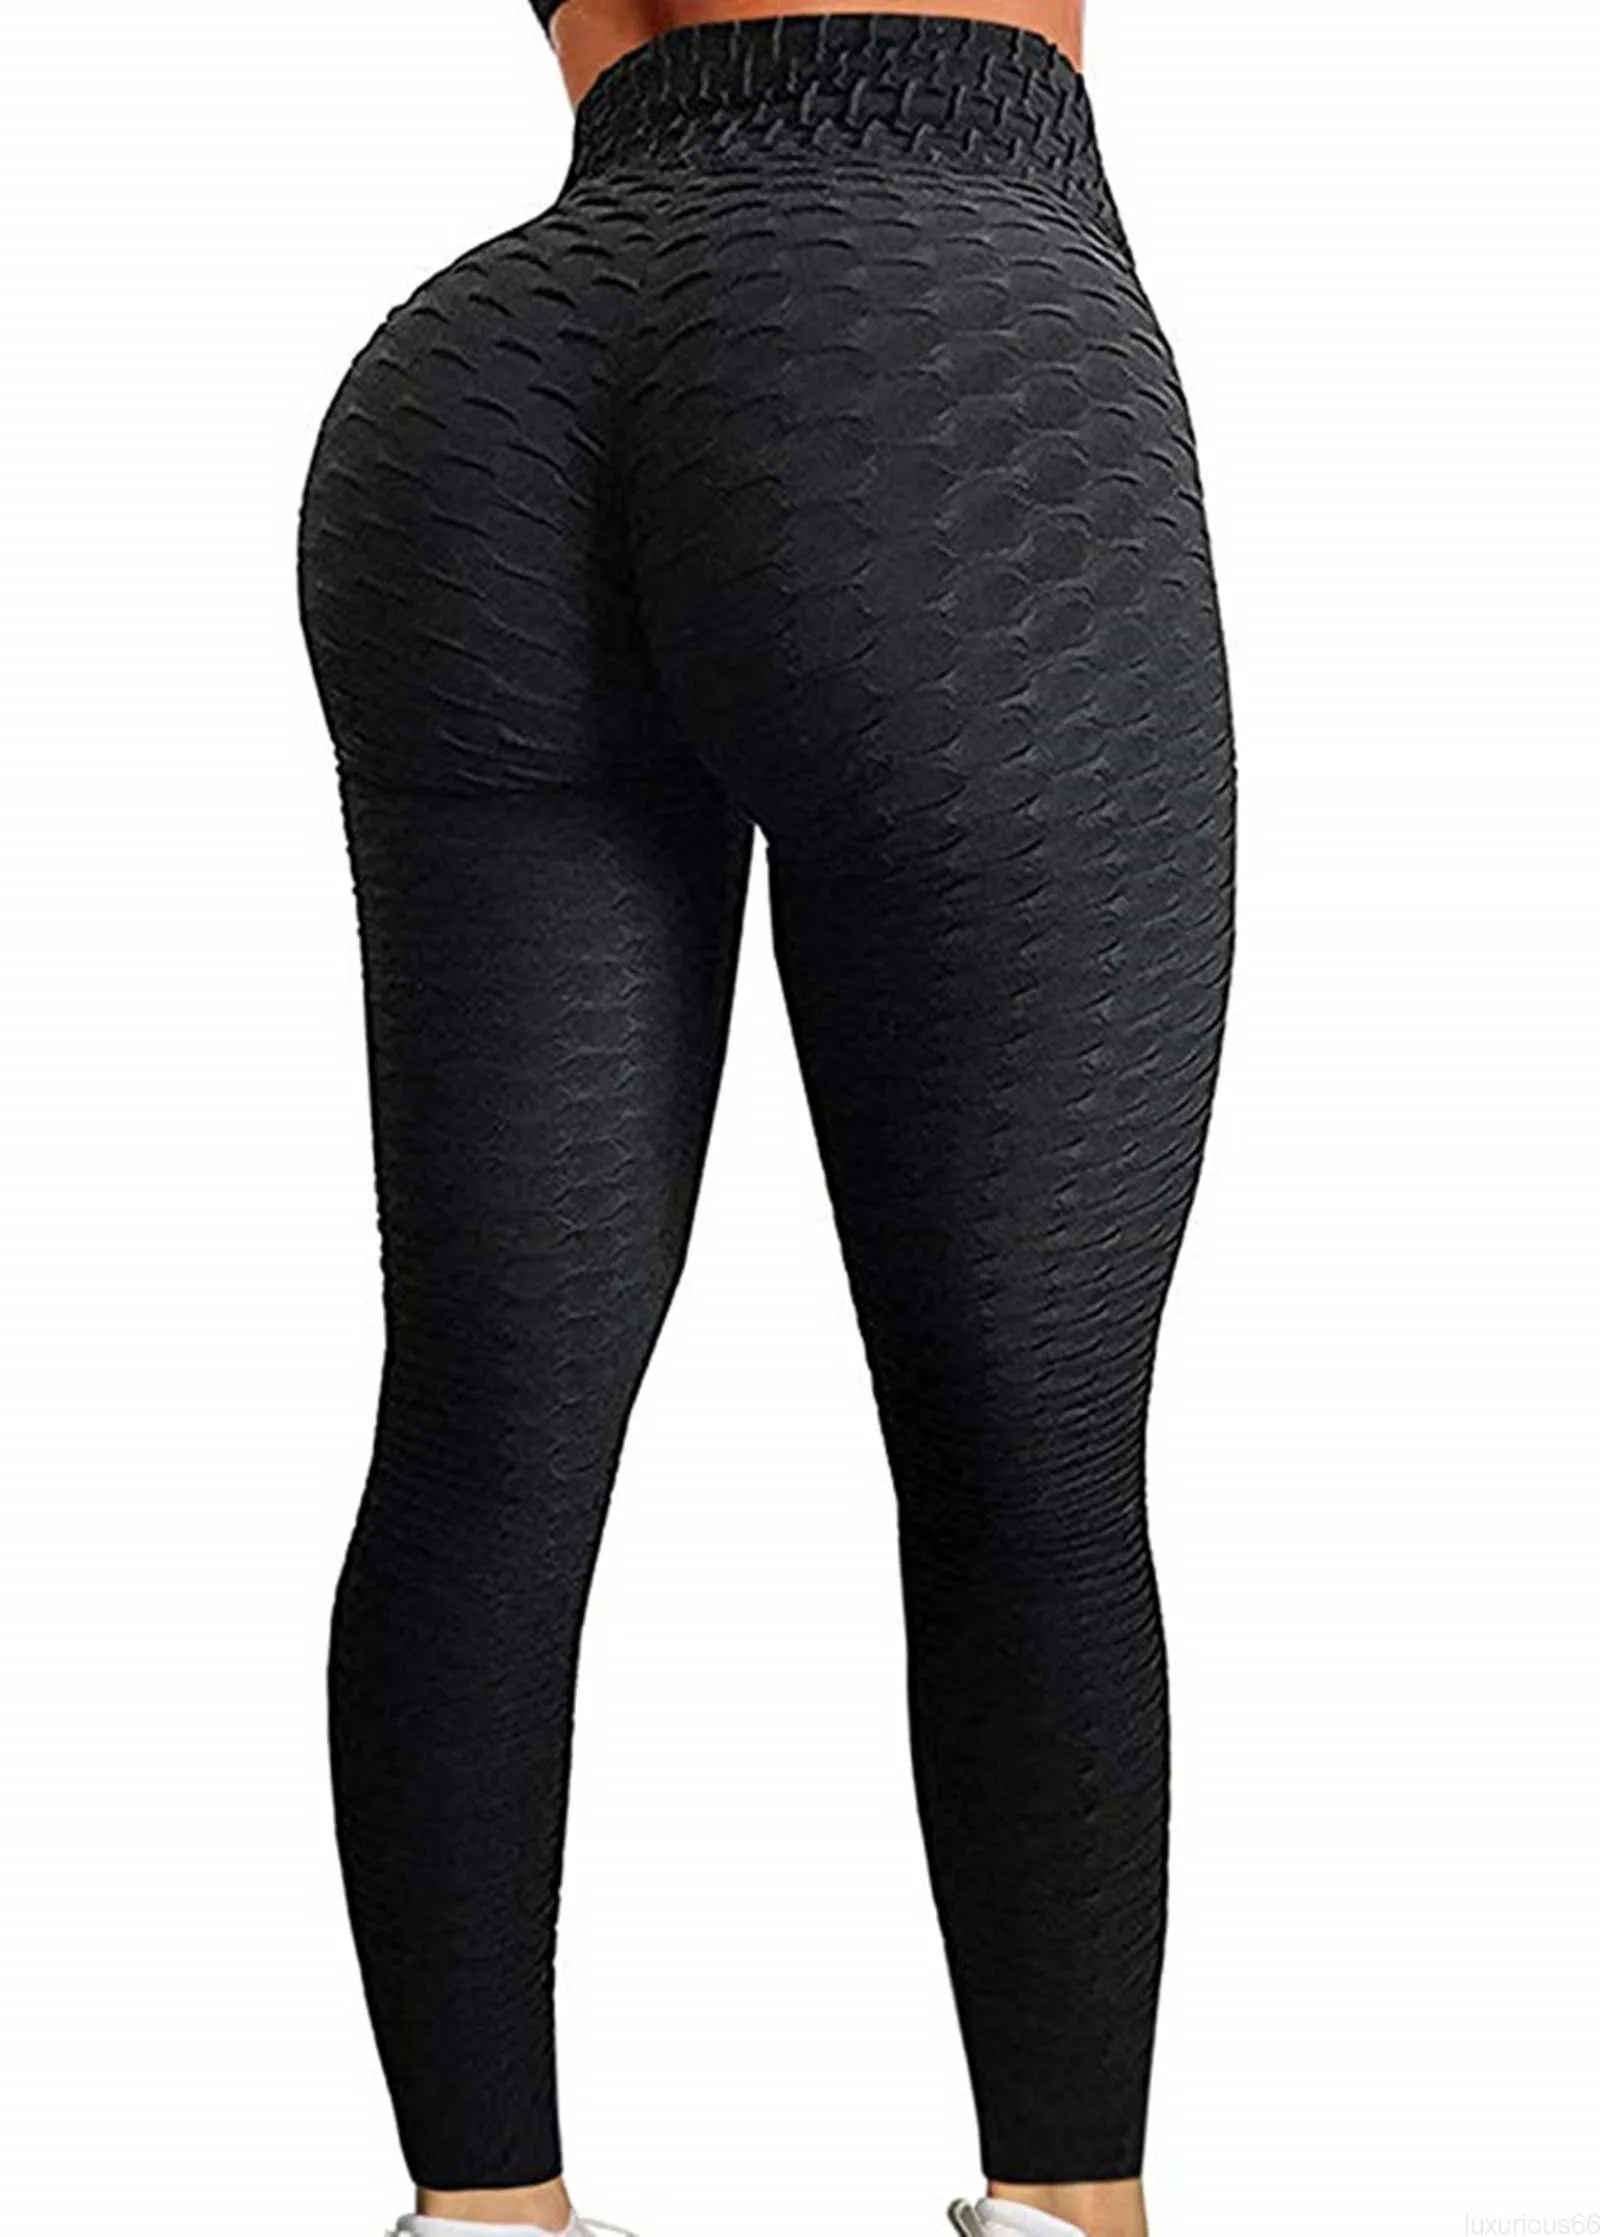 High Waist Black Joggers: Plus Size Workout Leggings Fitness Pants With  Push Up And Leg Support For Gym And Workout From Luxurious66, $8.05